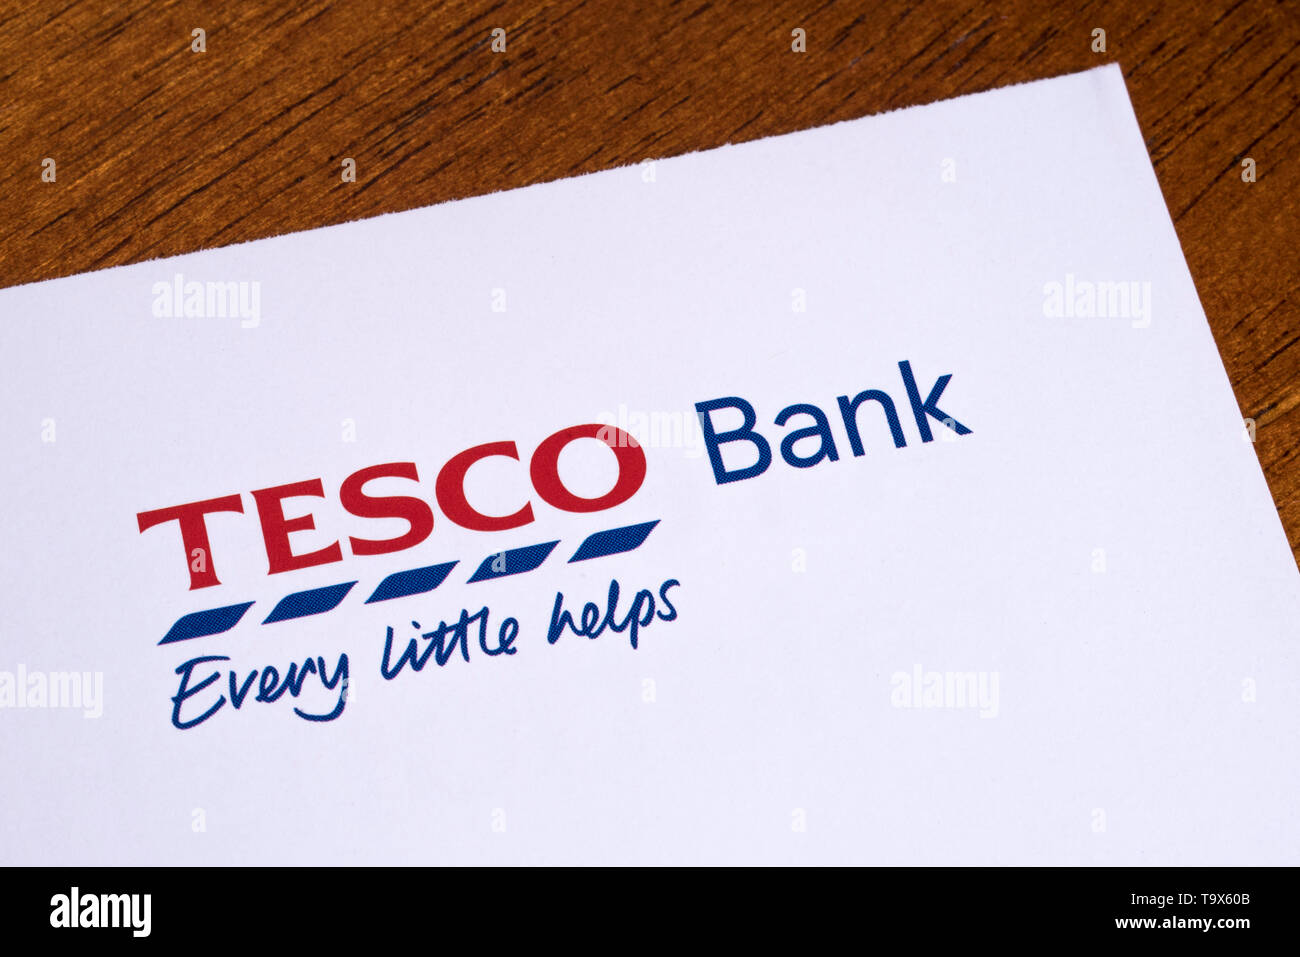 London, UK - May 14th 2019: The logo of Tesco Bank, pictured on the top of an information leaflet. Stock Photo